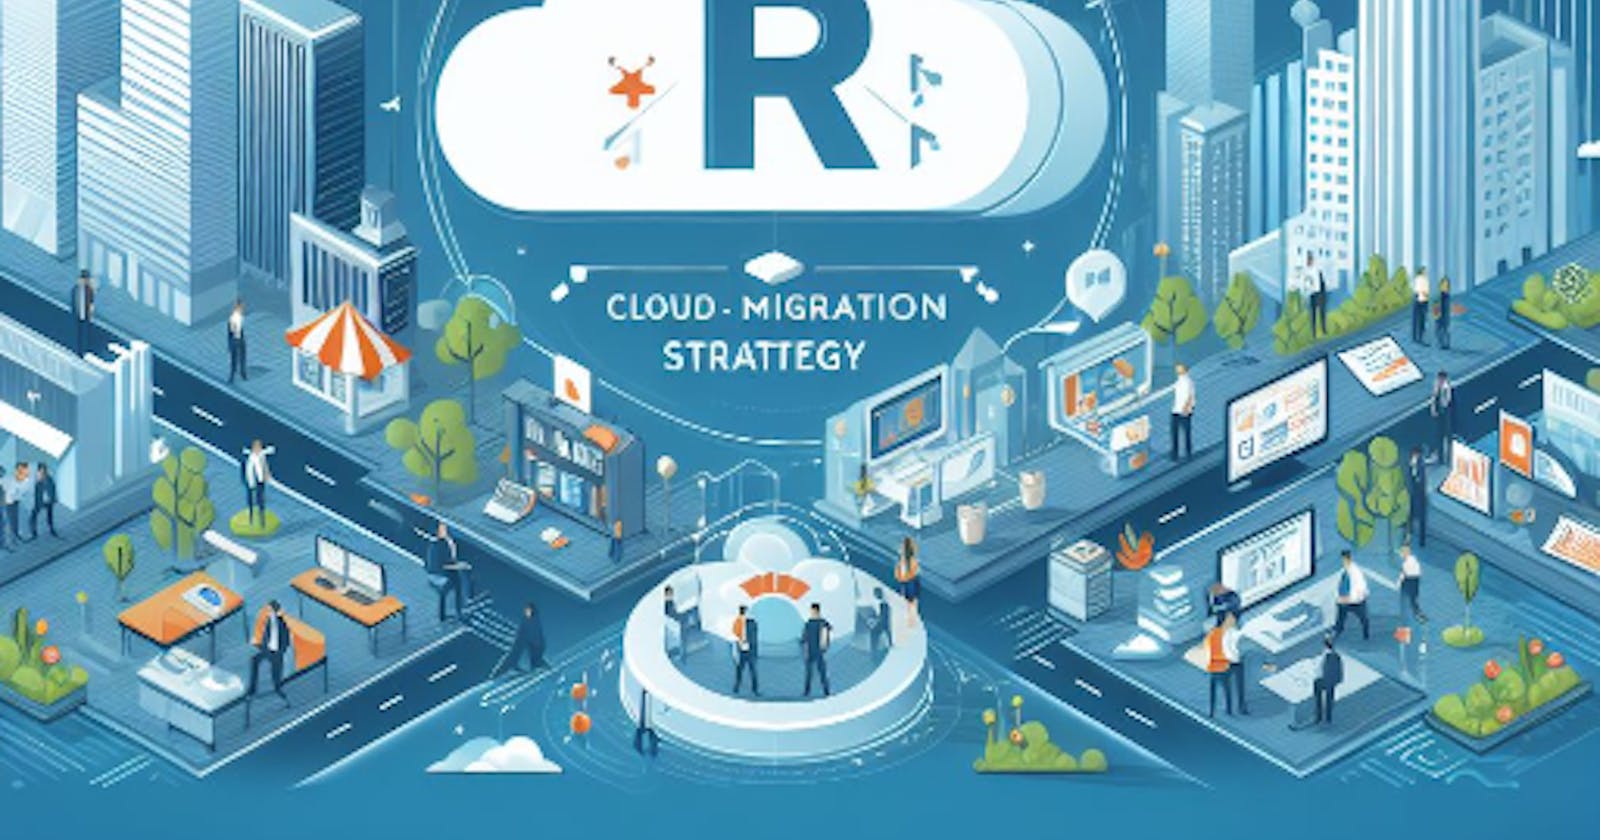 What are the 6 R’s of Cloud Migration Strategy?